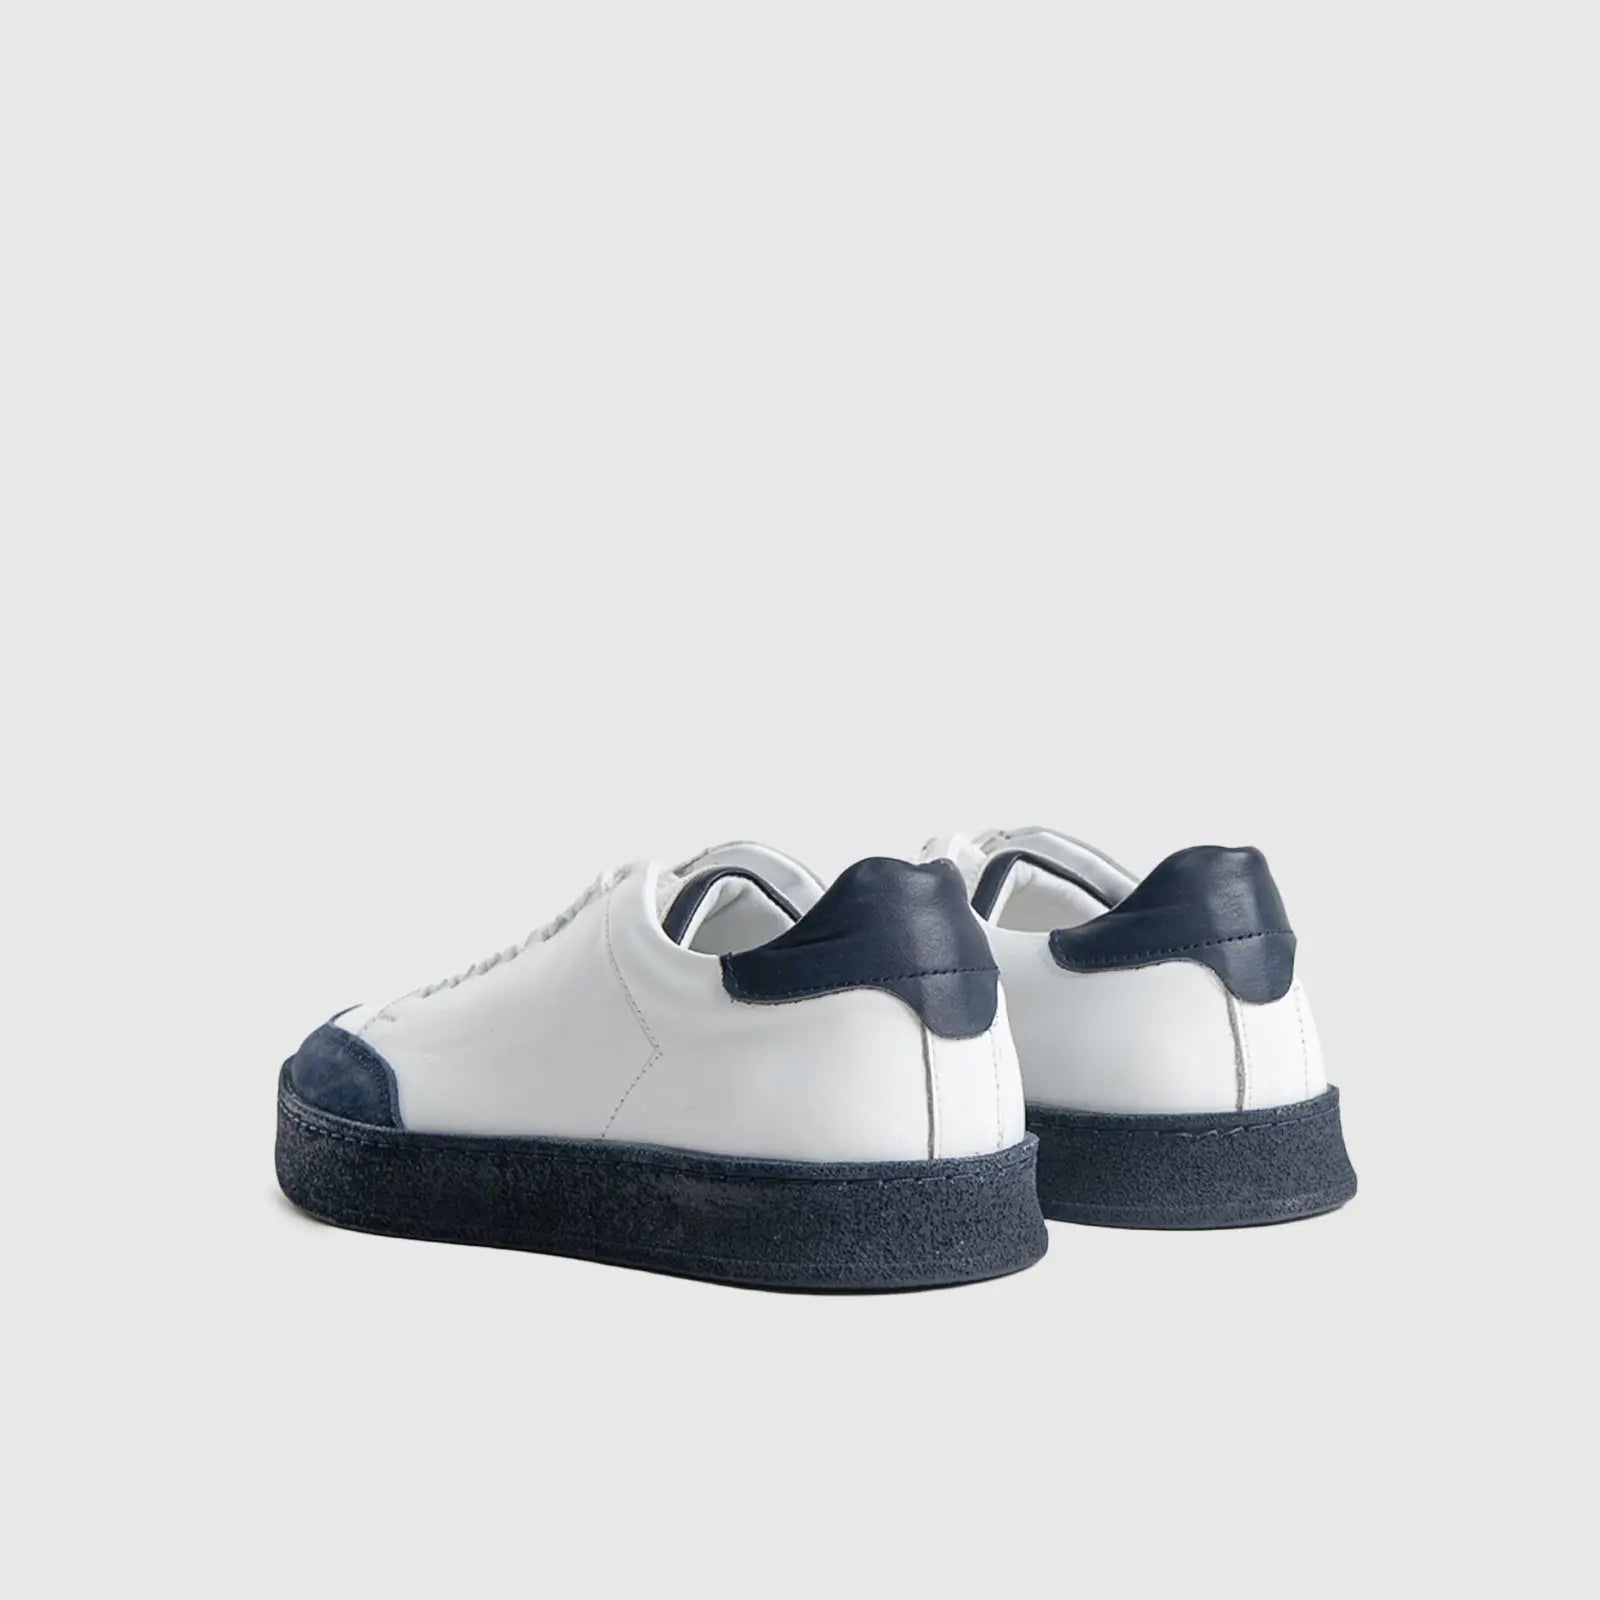 Casual Sneakers 2202 White/Navy Sneakers | familyshoecentre